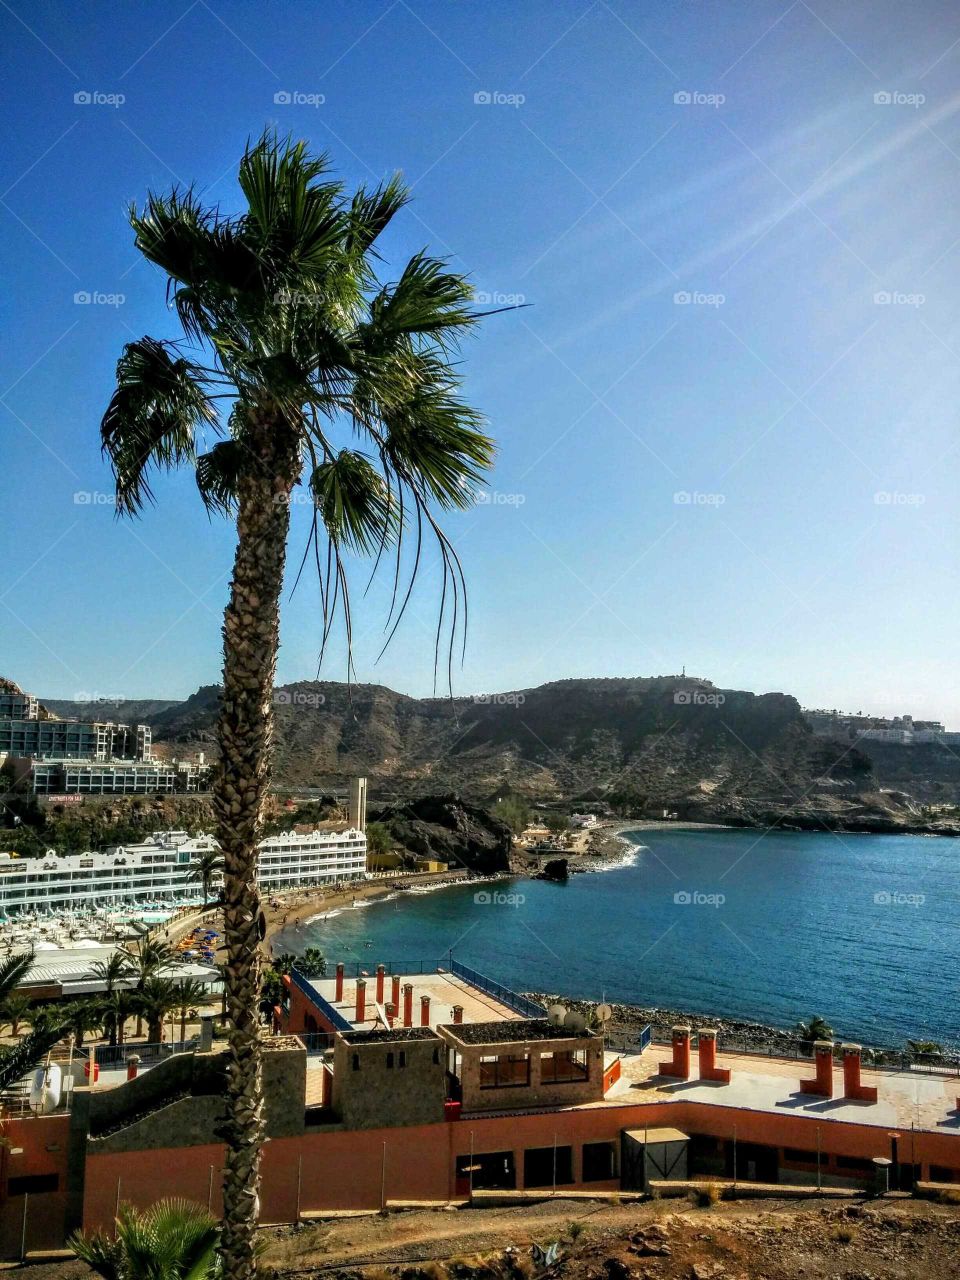 This picture is taken in December 2015 in Playa del Cura, Gran Canaria Island, Spain.